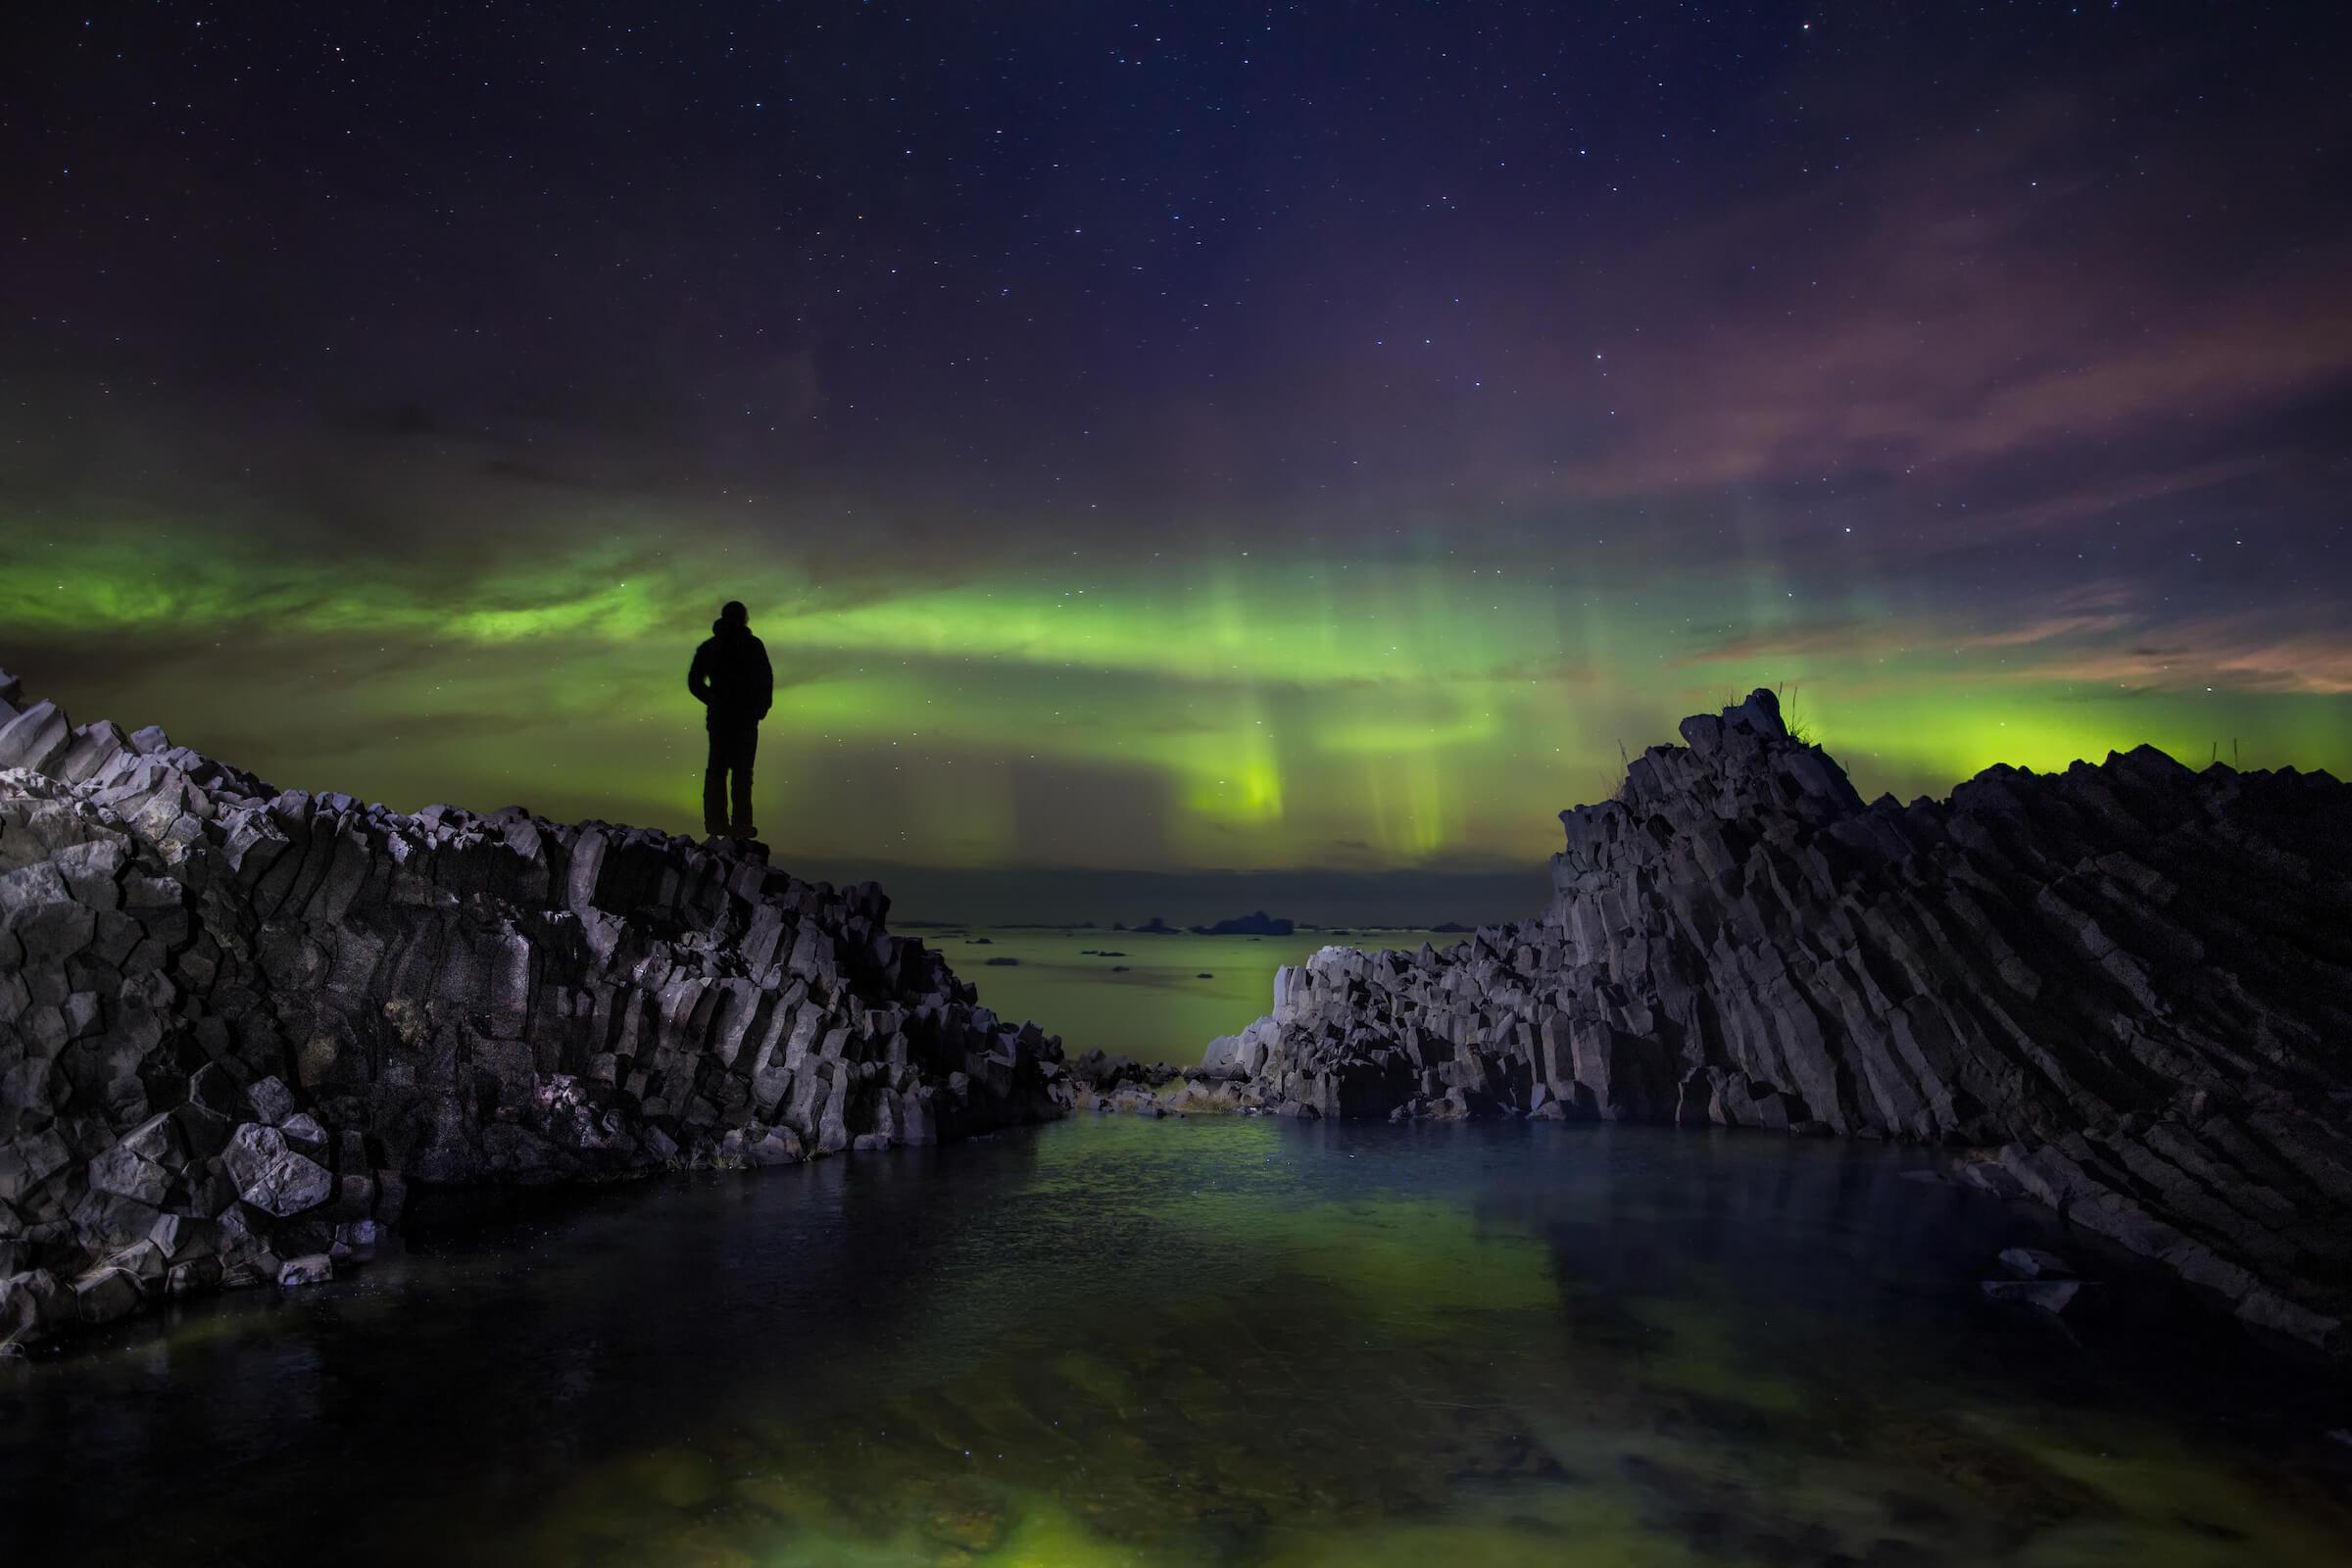 Hiker standing on volcanic rocks on Disko Island in North Greenland looking at northern lights dancing over the ocean. Photo by Paul Zizka - Visit Greenland